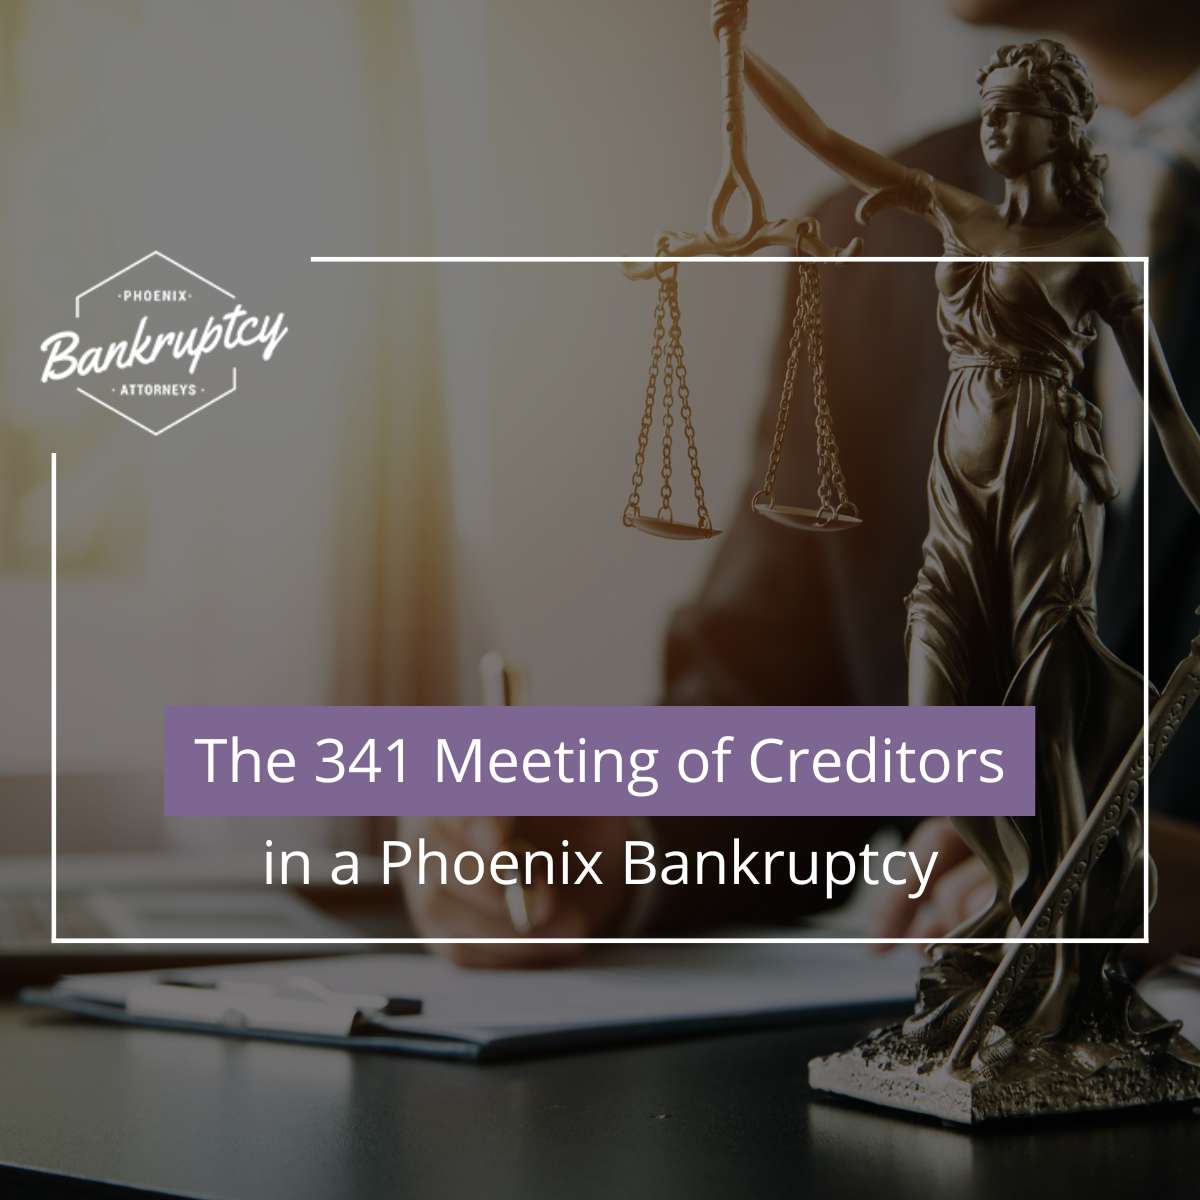 The 341 Meeting of Creditors in a Phoenix Bankruptcy